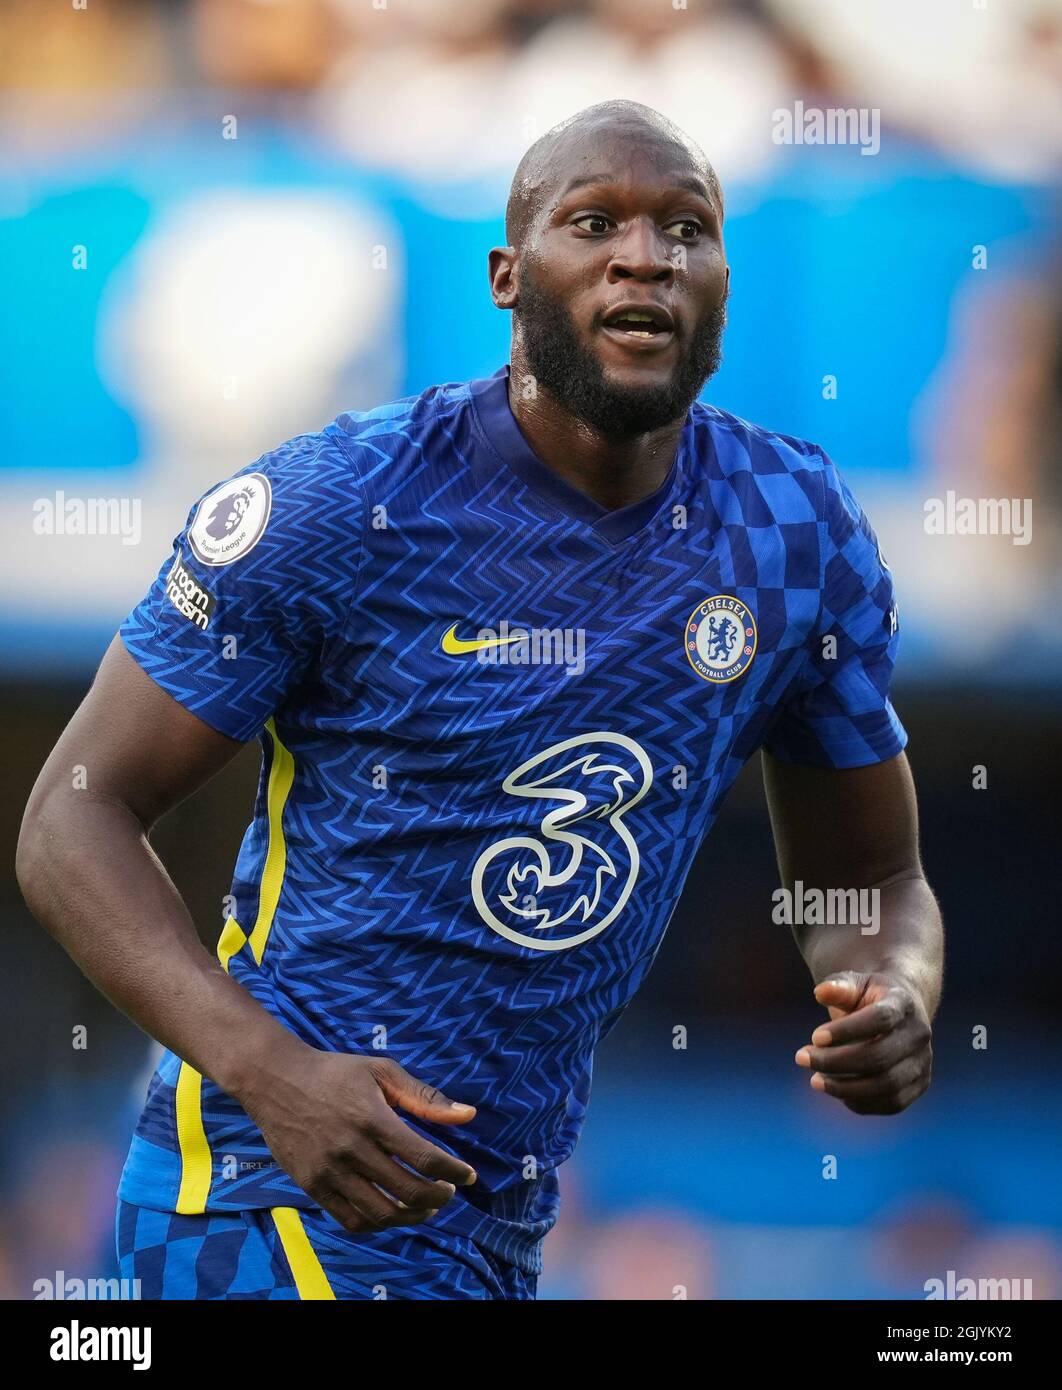 London, UK. 11th Sep, 2021. Romelu Lukaku of Chelsea during the Premier League match between Chelsea and Aston Villa at Stamford Bridge, London, England on 11 September 2021. Photo by Andy Rowland. Credit: PRiME Media Images/Alamy Live News Credit: PRiME Media Images/Alamy Live News Stock Photo